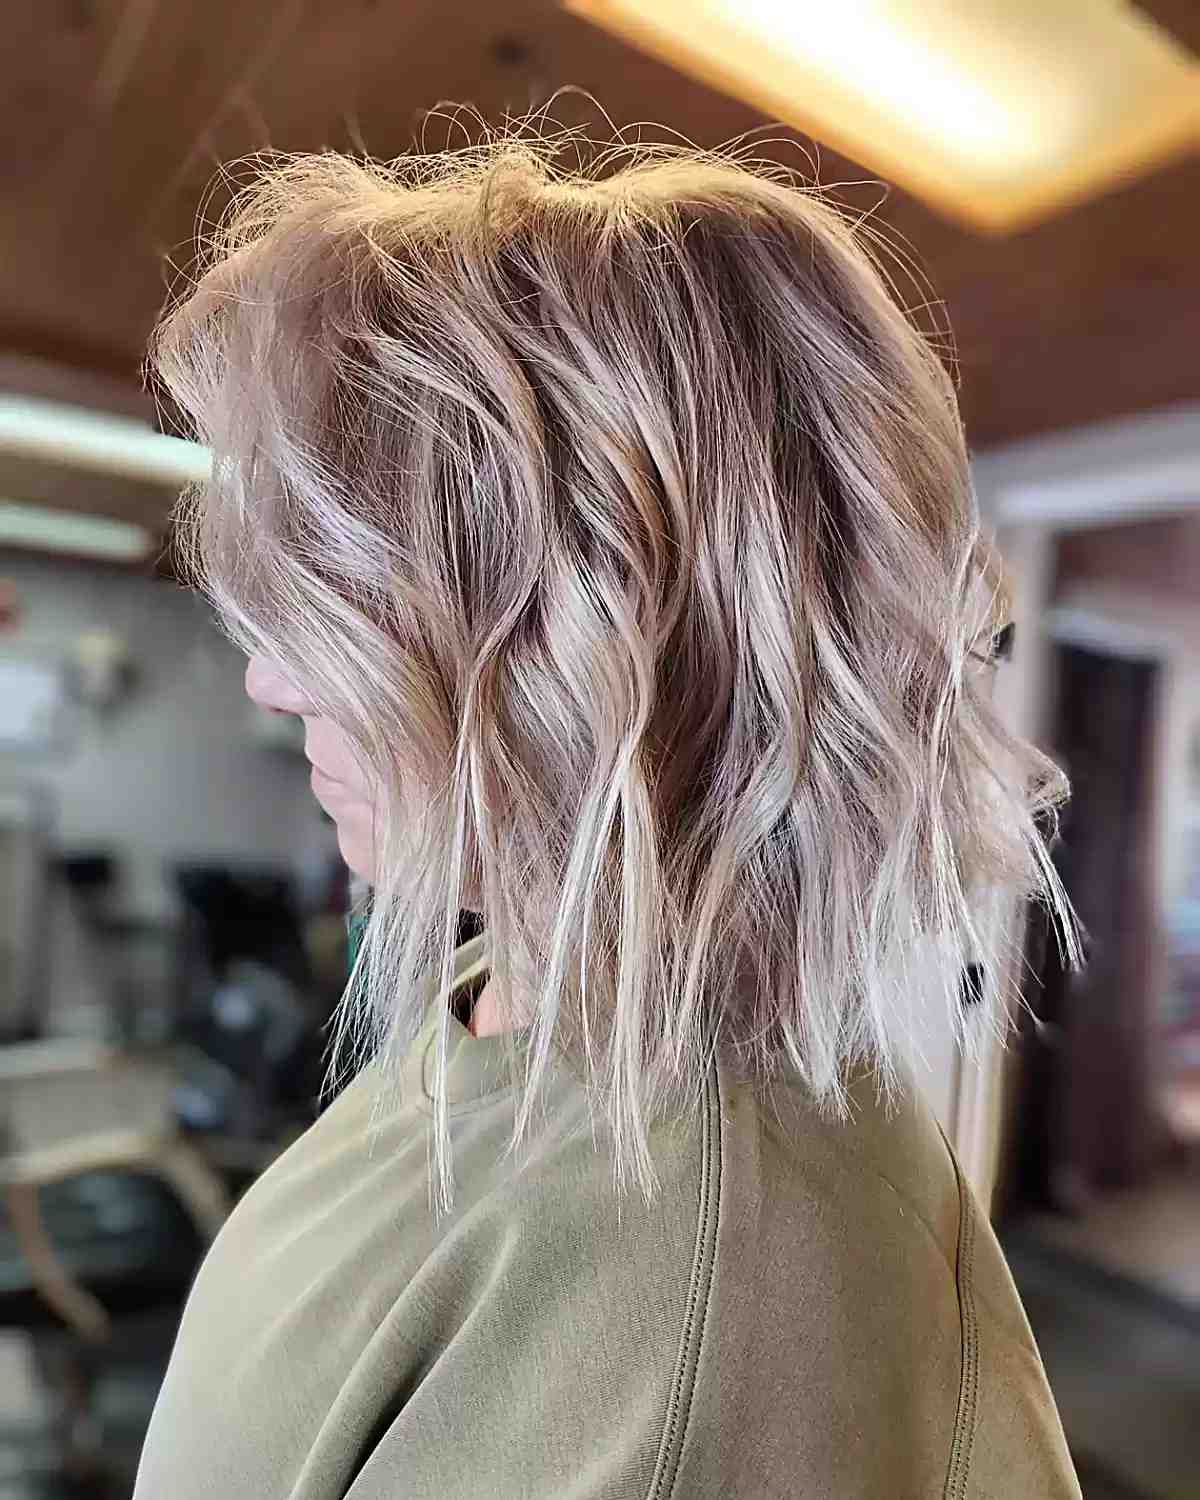 Lived-in Choppy Textured Lob Cut with a Messy Style for Fine Hair